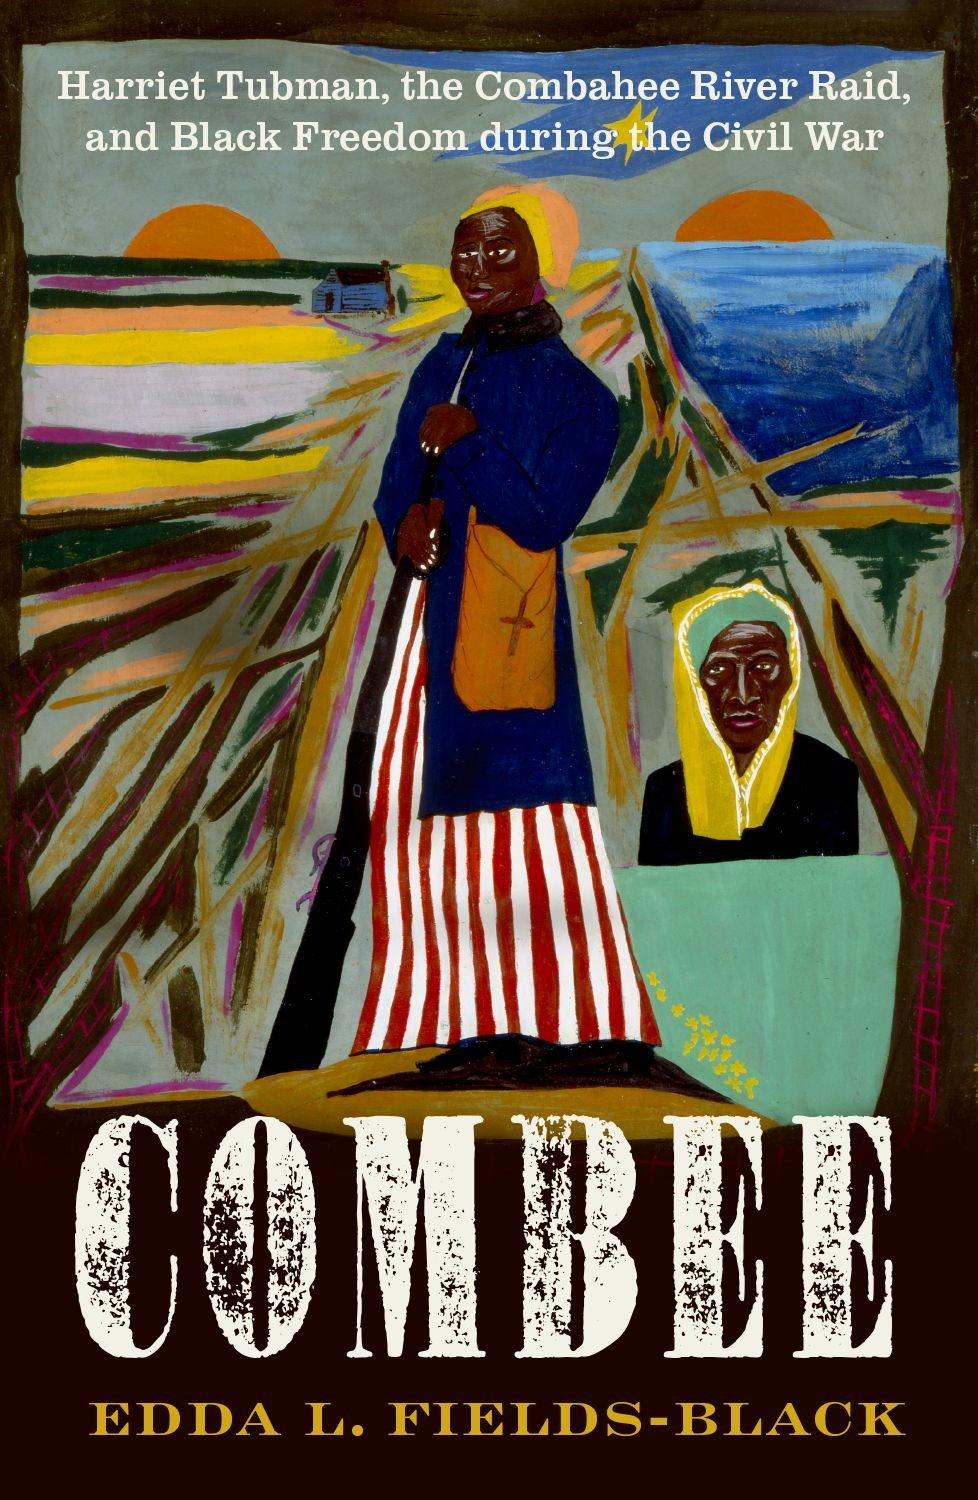 Combee: Harriet Tubman, the Combahee River Raid, and Black Freedom During the Civil War